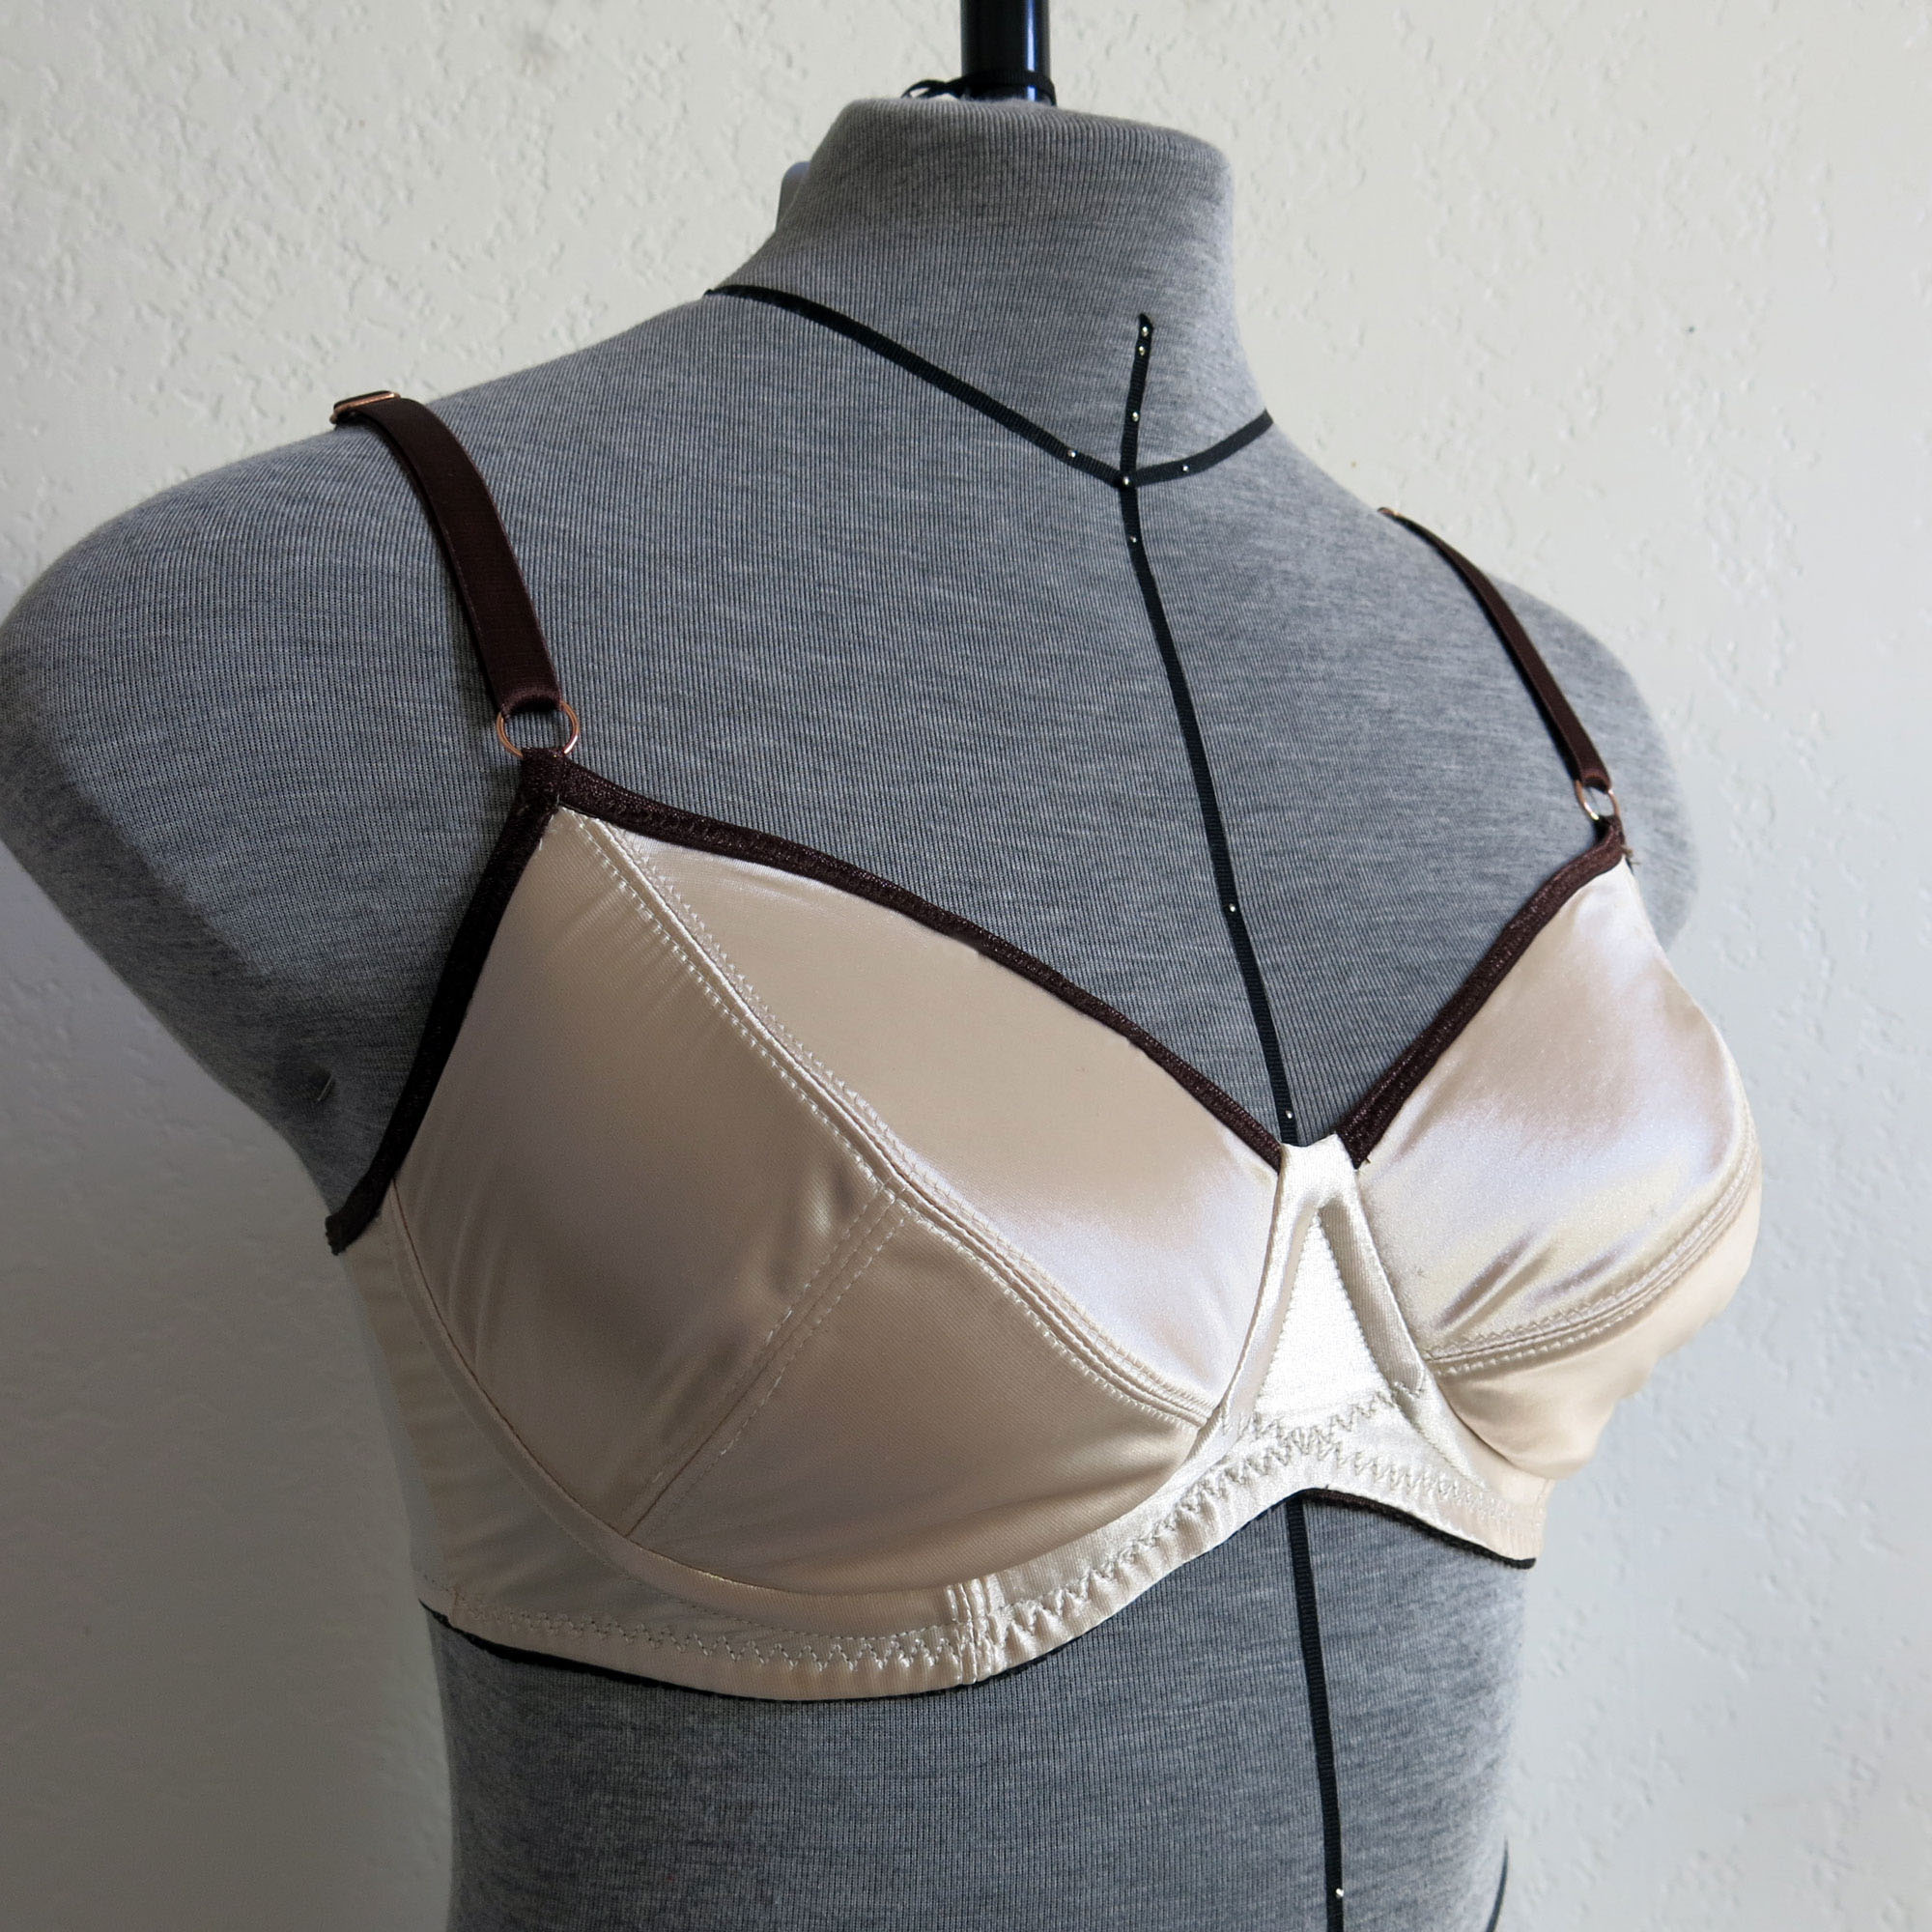 White Bra Cup with a Strap Size 32B - Bra Cups - Bra Making Supplies -  Notions